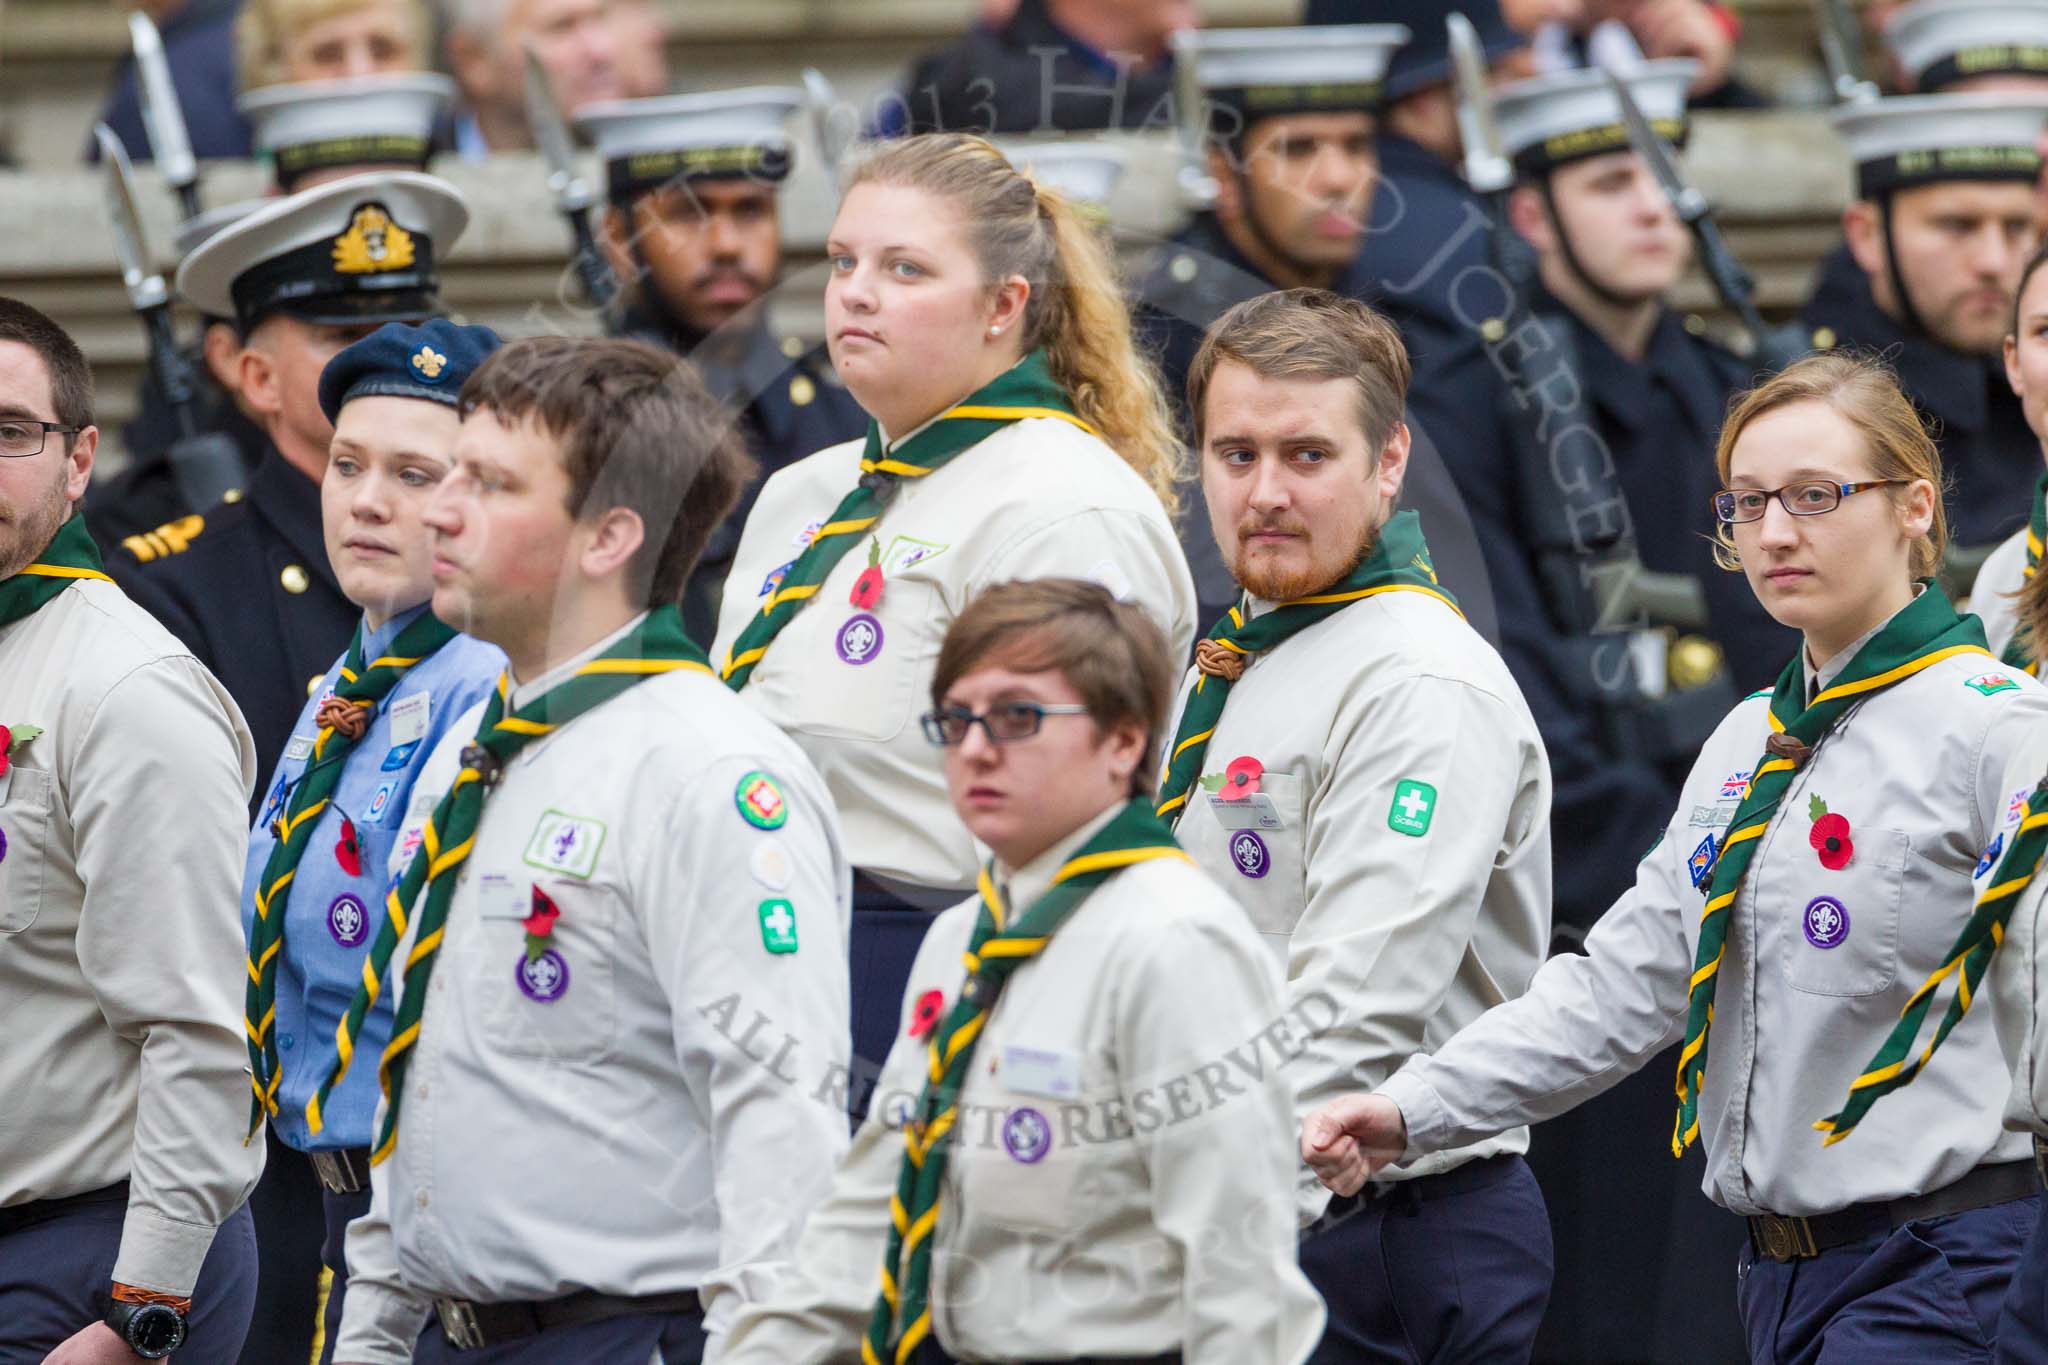 Remembrance Sunday at the Cenotaph 2015: Group M50, Scout Association.
Cenotaph, Whitehall, London SW1,
London,
Greater London,
United Kingdom,
on 08 November 2015 at 12:20, image #1724